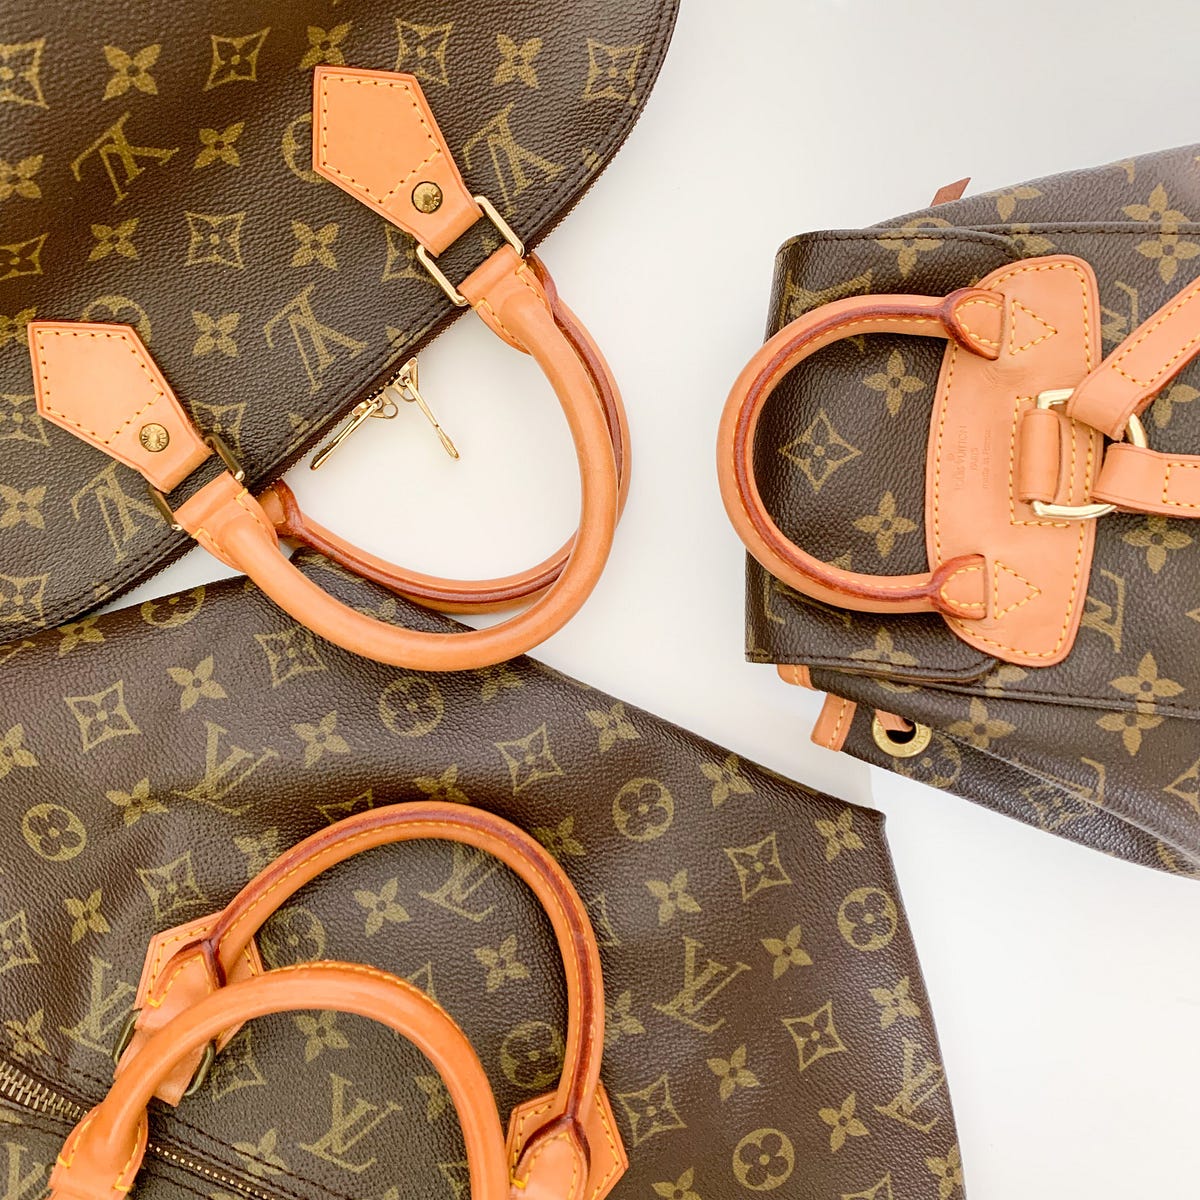 A Louis Vuitton handbag is now cheaper to buy in London than anywhere else